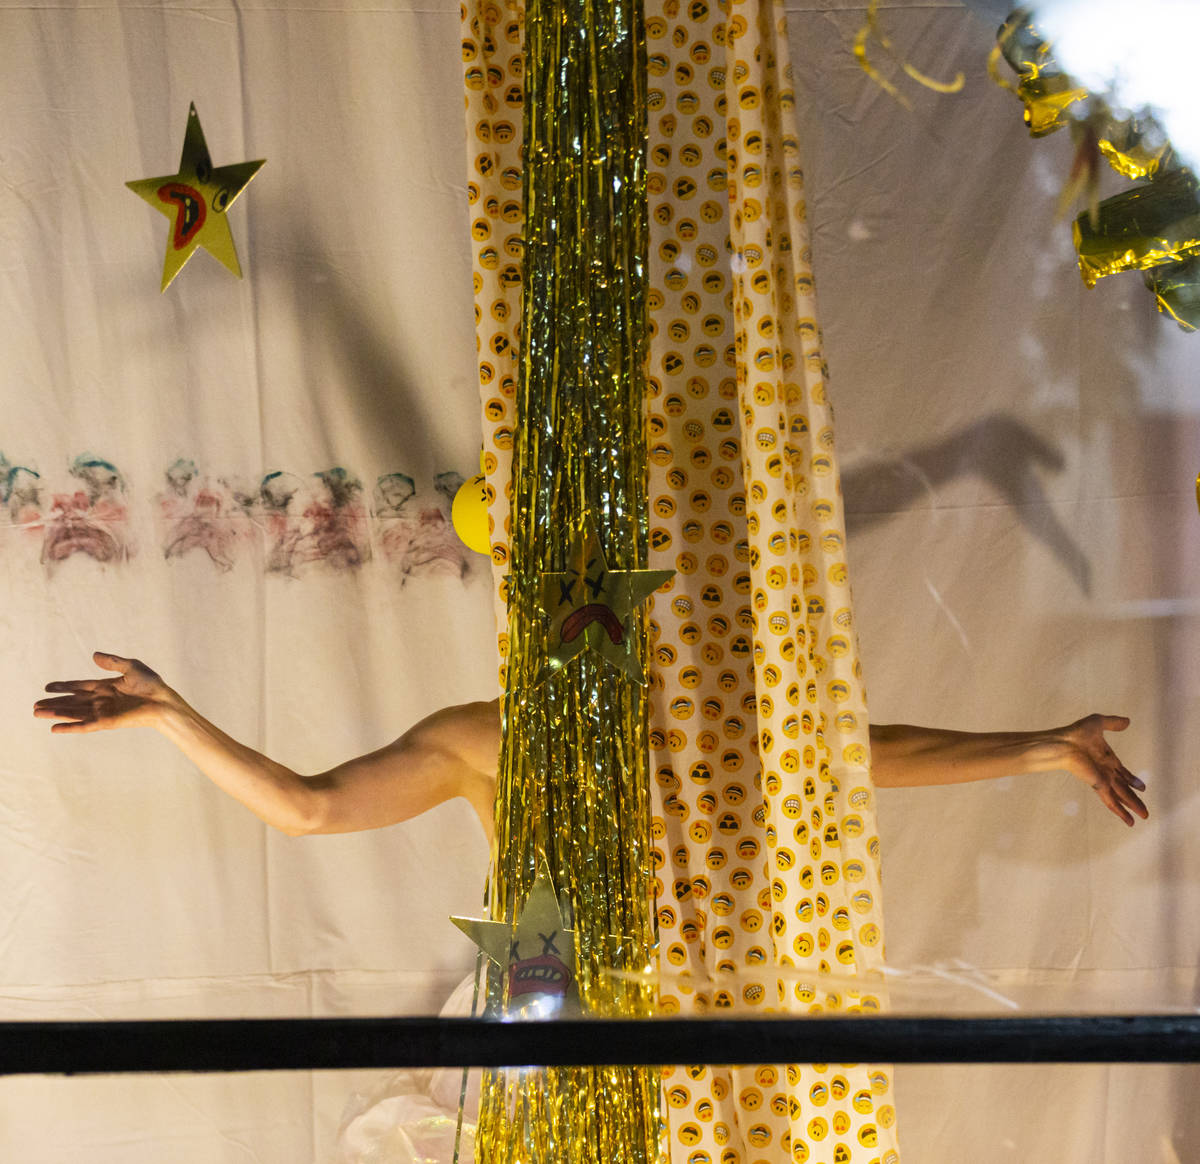 Heidi Rider performs from the windows of the Majestic Repertory Theatre in the Arts District of ...